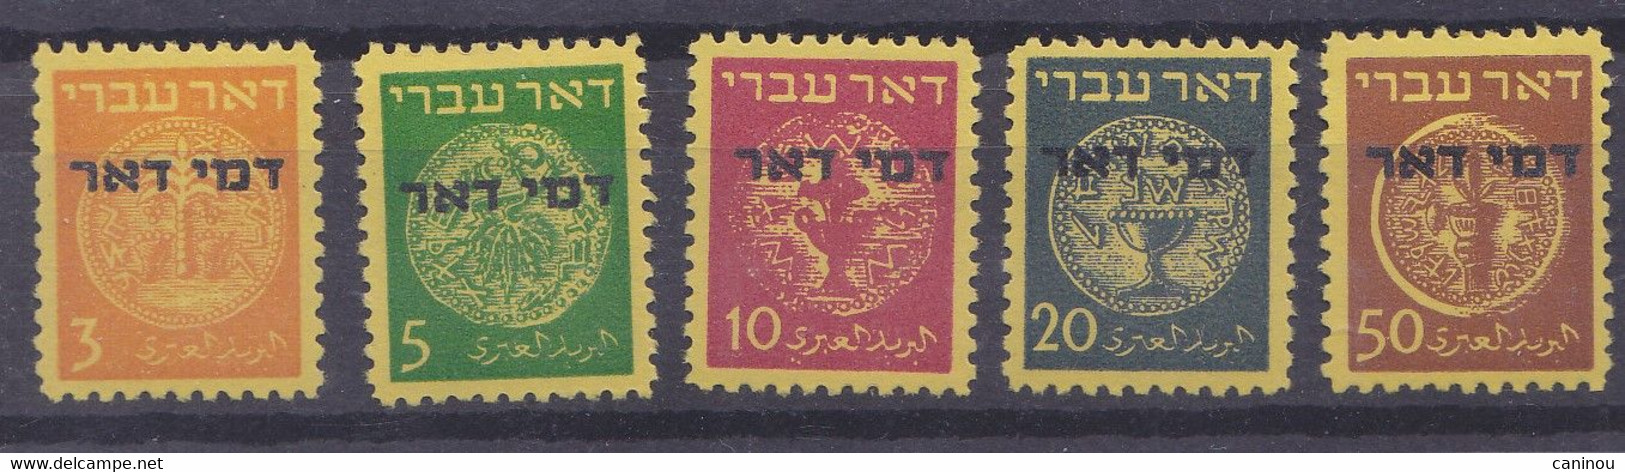 ISRAEL TIMBRES TAXE 1948 Y & T 1-5 MONNAIES ANCIENNES NEUFS TRACES CHARNIERES - Timbres-taxe